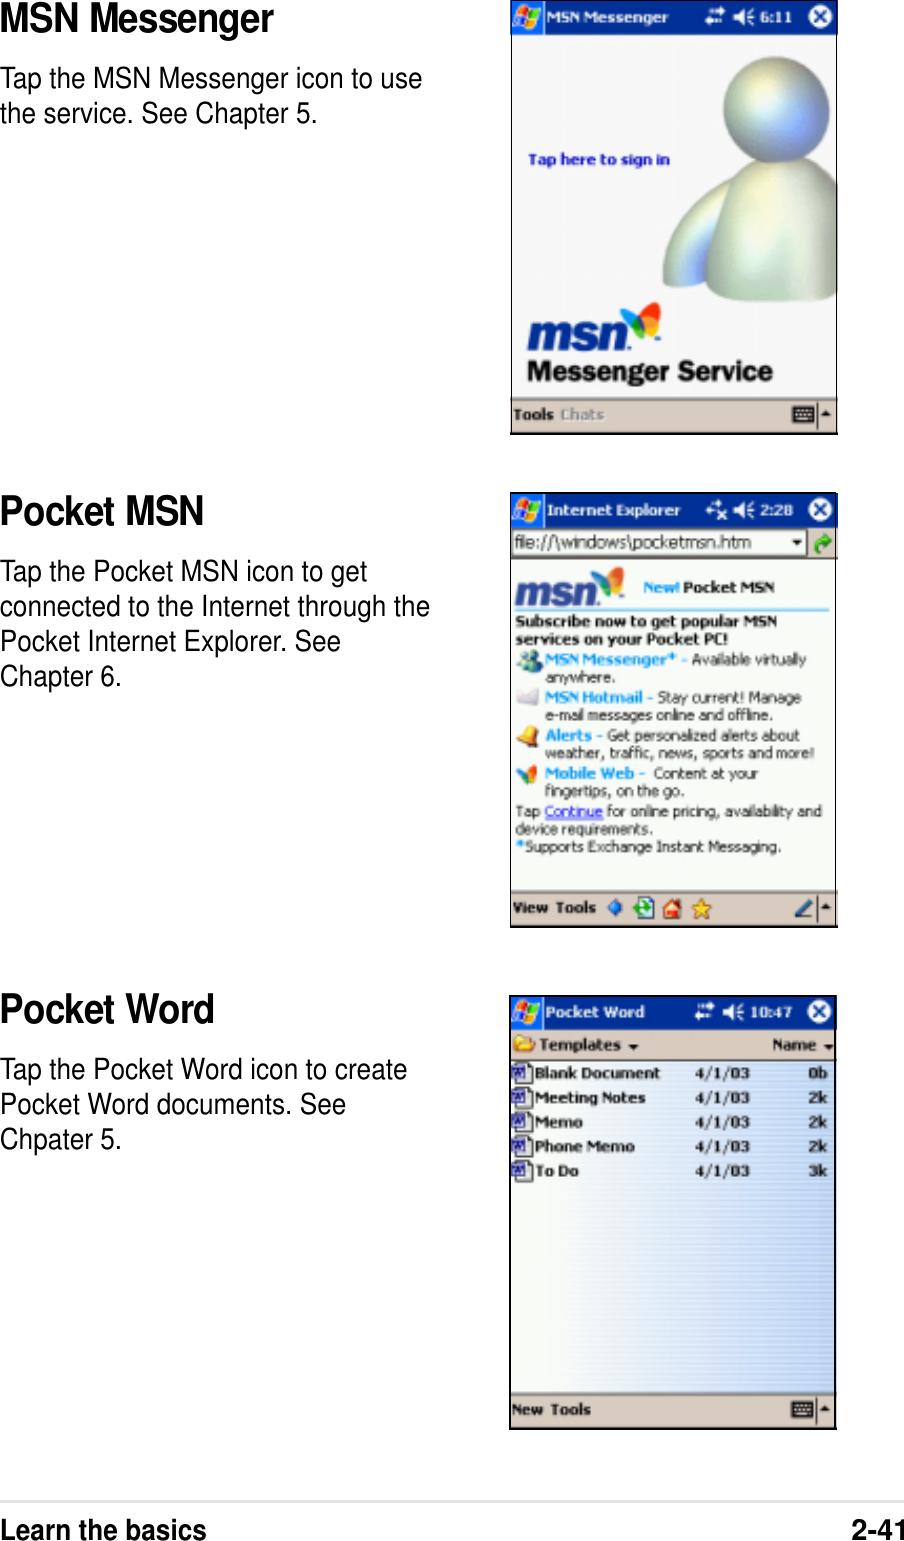 Learn the basics2-41MSN MessengerTap the MSN Messenger icon to usethe service. See Chapter 5.Pocket MSNTap the Pocket MSN icon to getconnected to the Internet through thePocket Internet Explorer. SeeChapter 6.Pocket WordTap the Pocket Word icon to createPocket Word documents. SeeChpater 5.